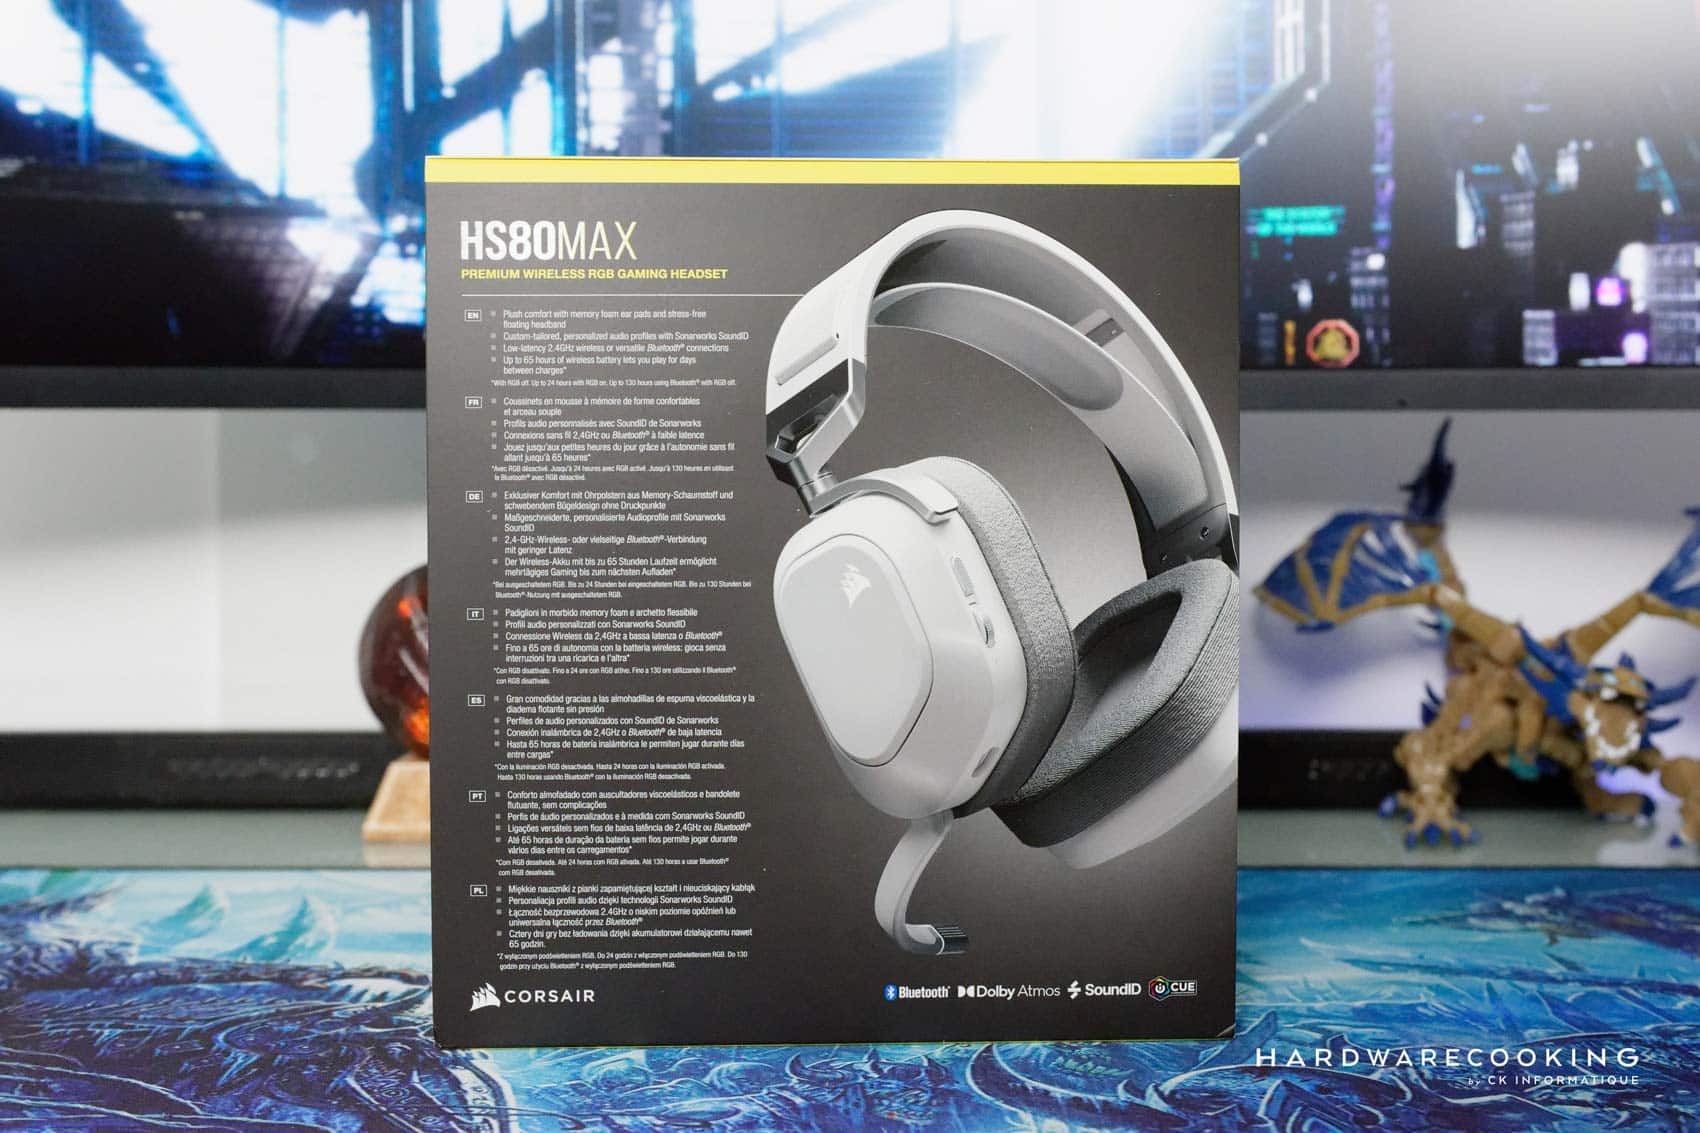 Test] Casque Gaming Corsair HS80 MAX - Pause Hardware